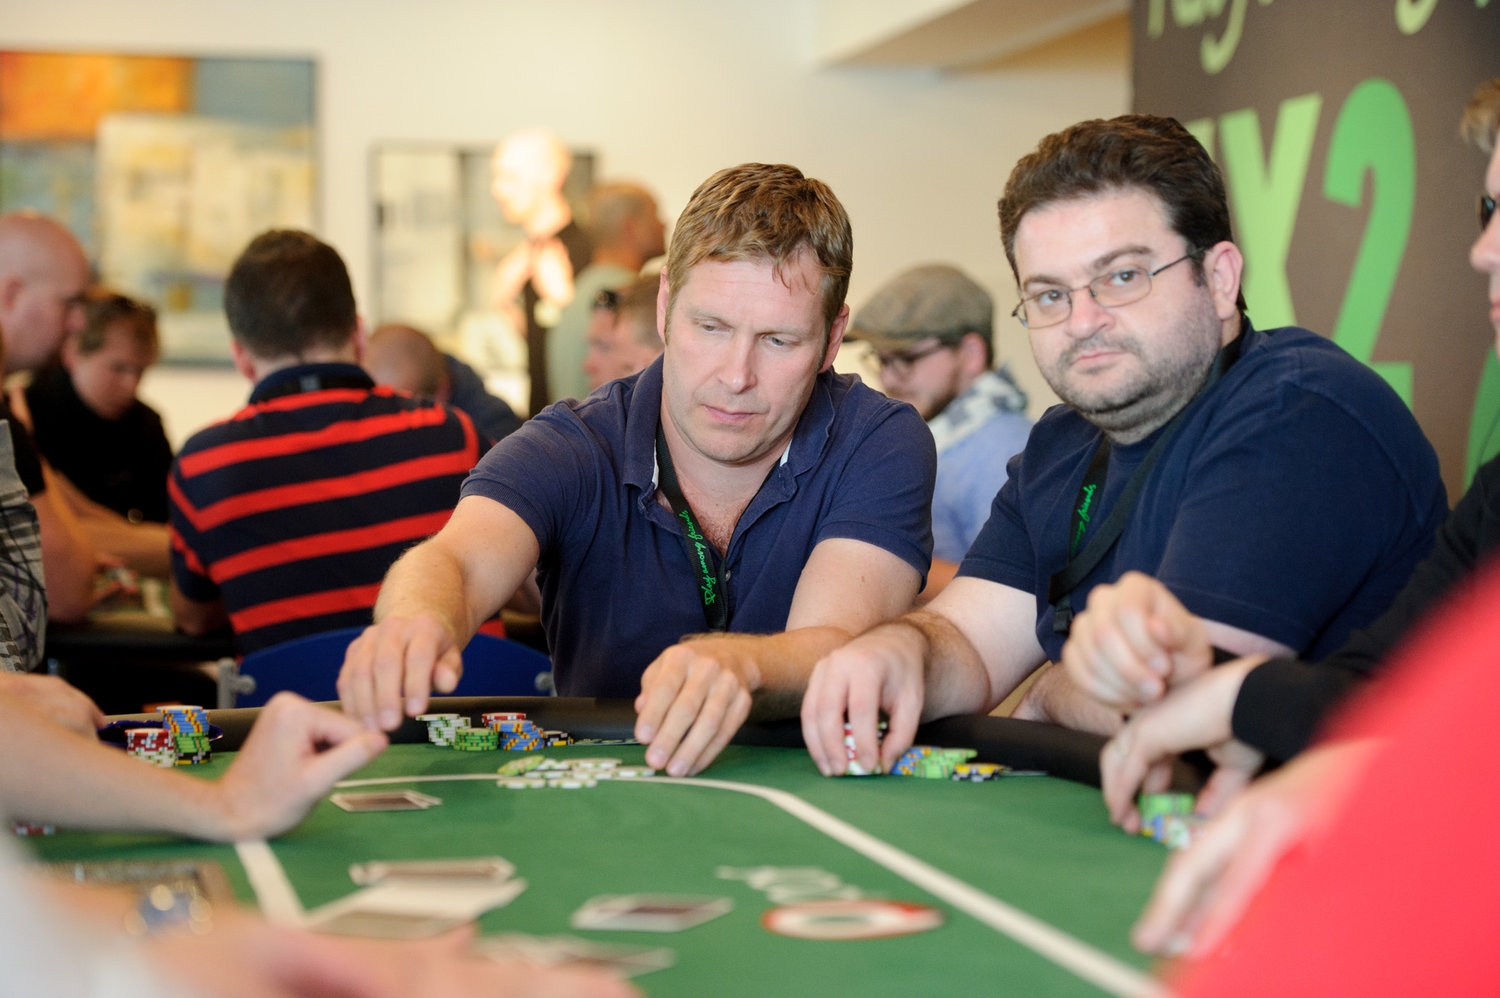 Men playing a game of poker at a poker table